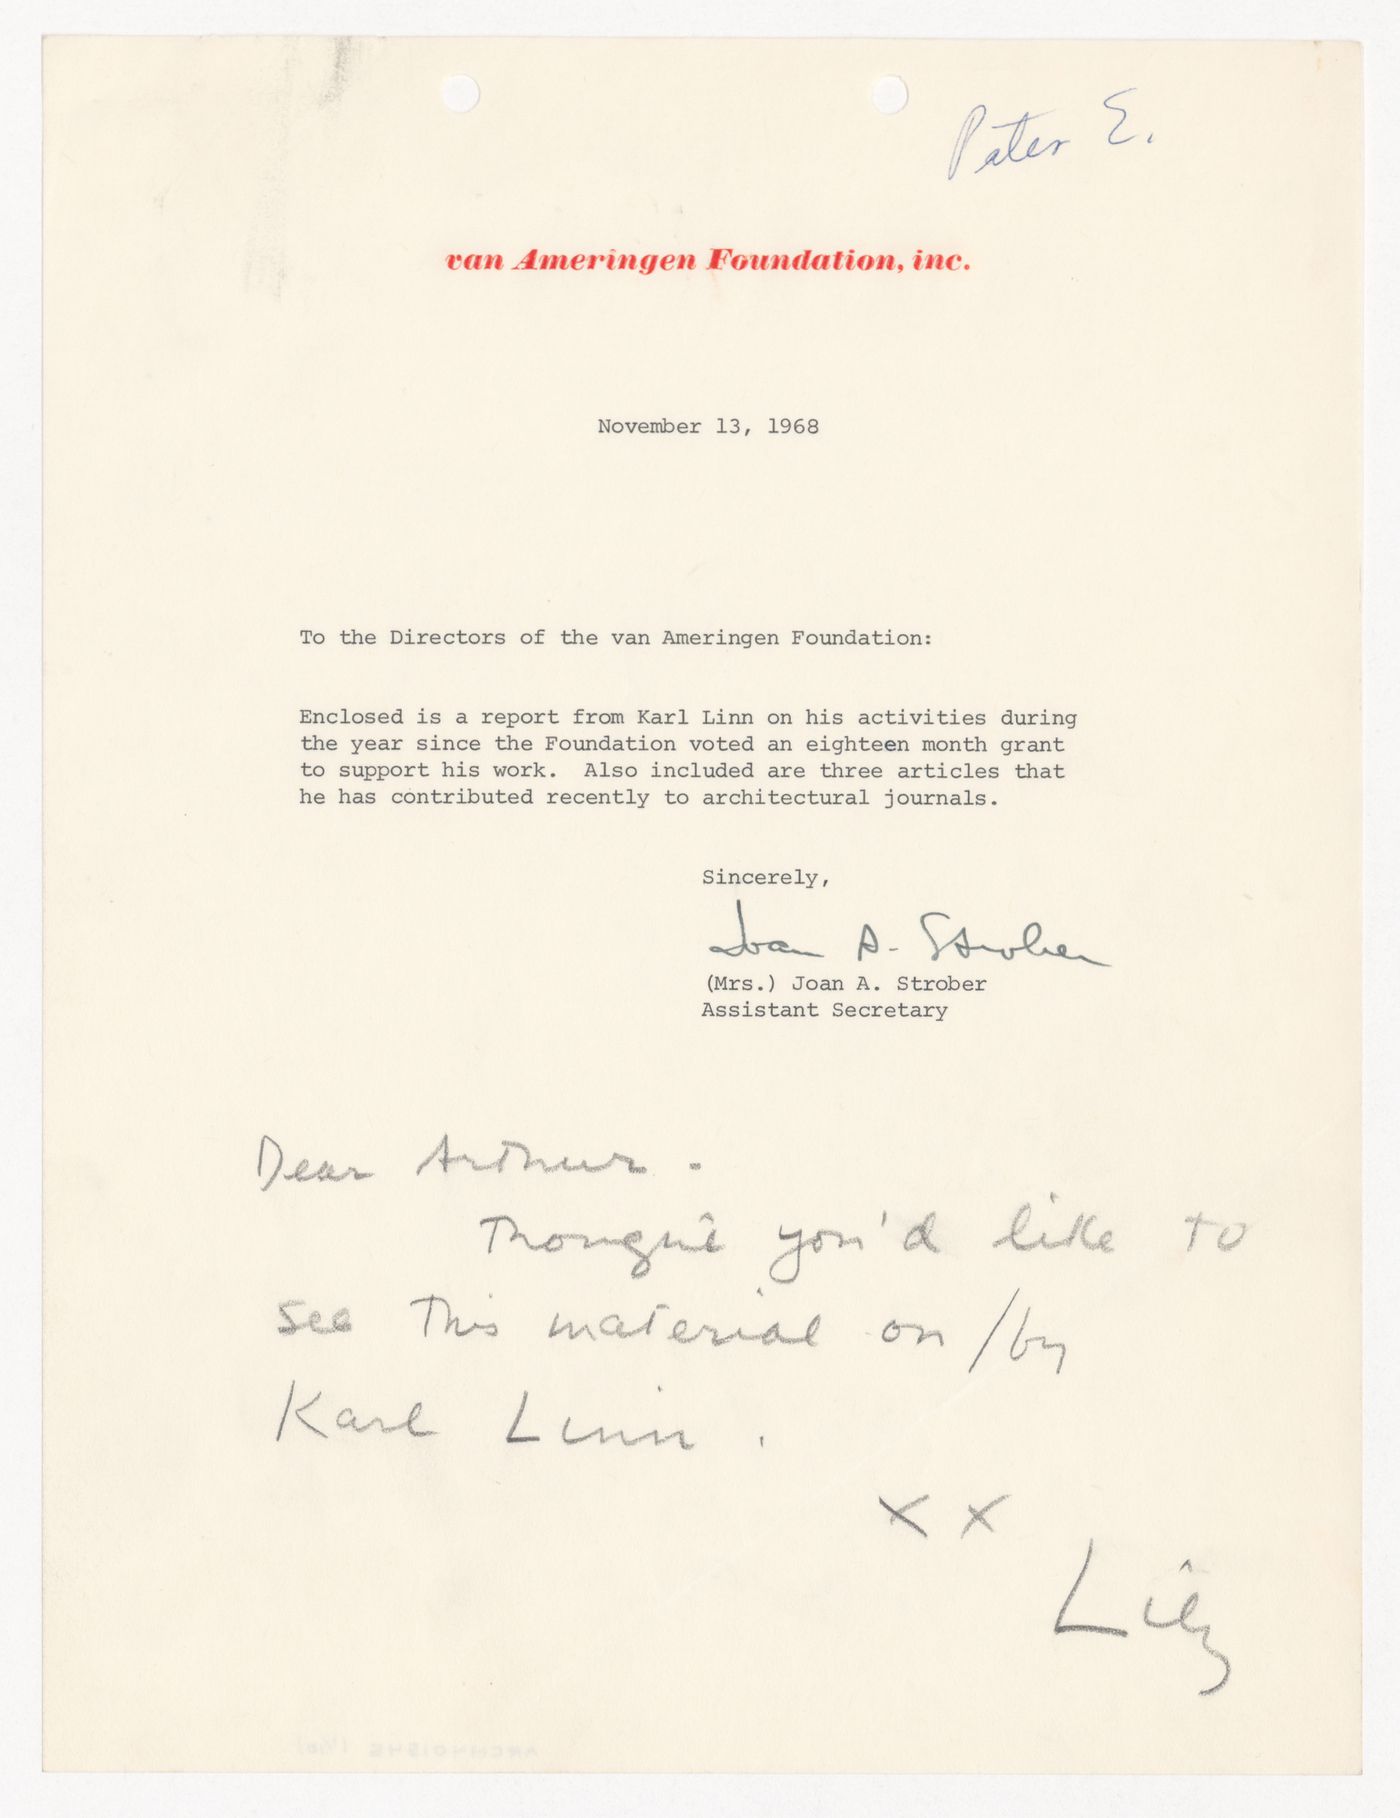 Letter from Joan A. Strober to the directors of the van Ameringen Foundation with attached grant report by Karl Linn and copies of articles forwarded to IAUS by Mrs. Douglas Auchincloss